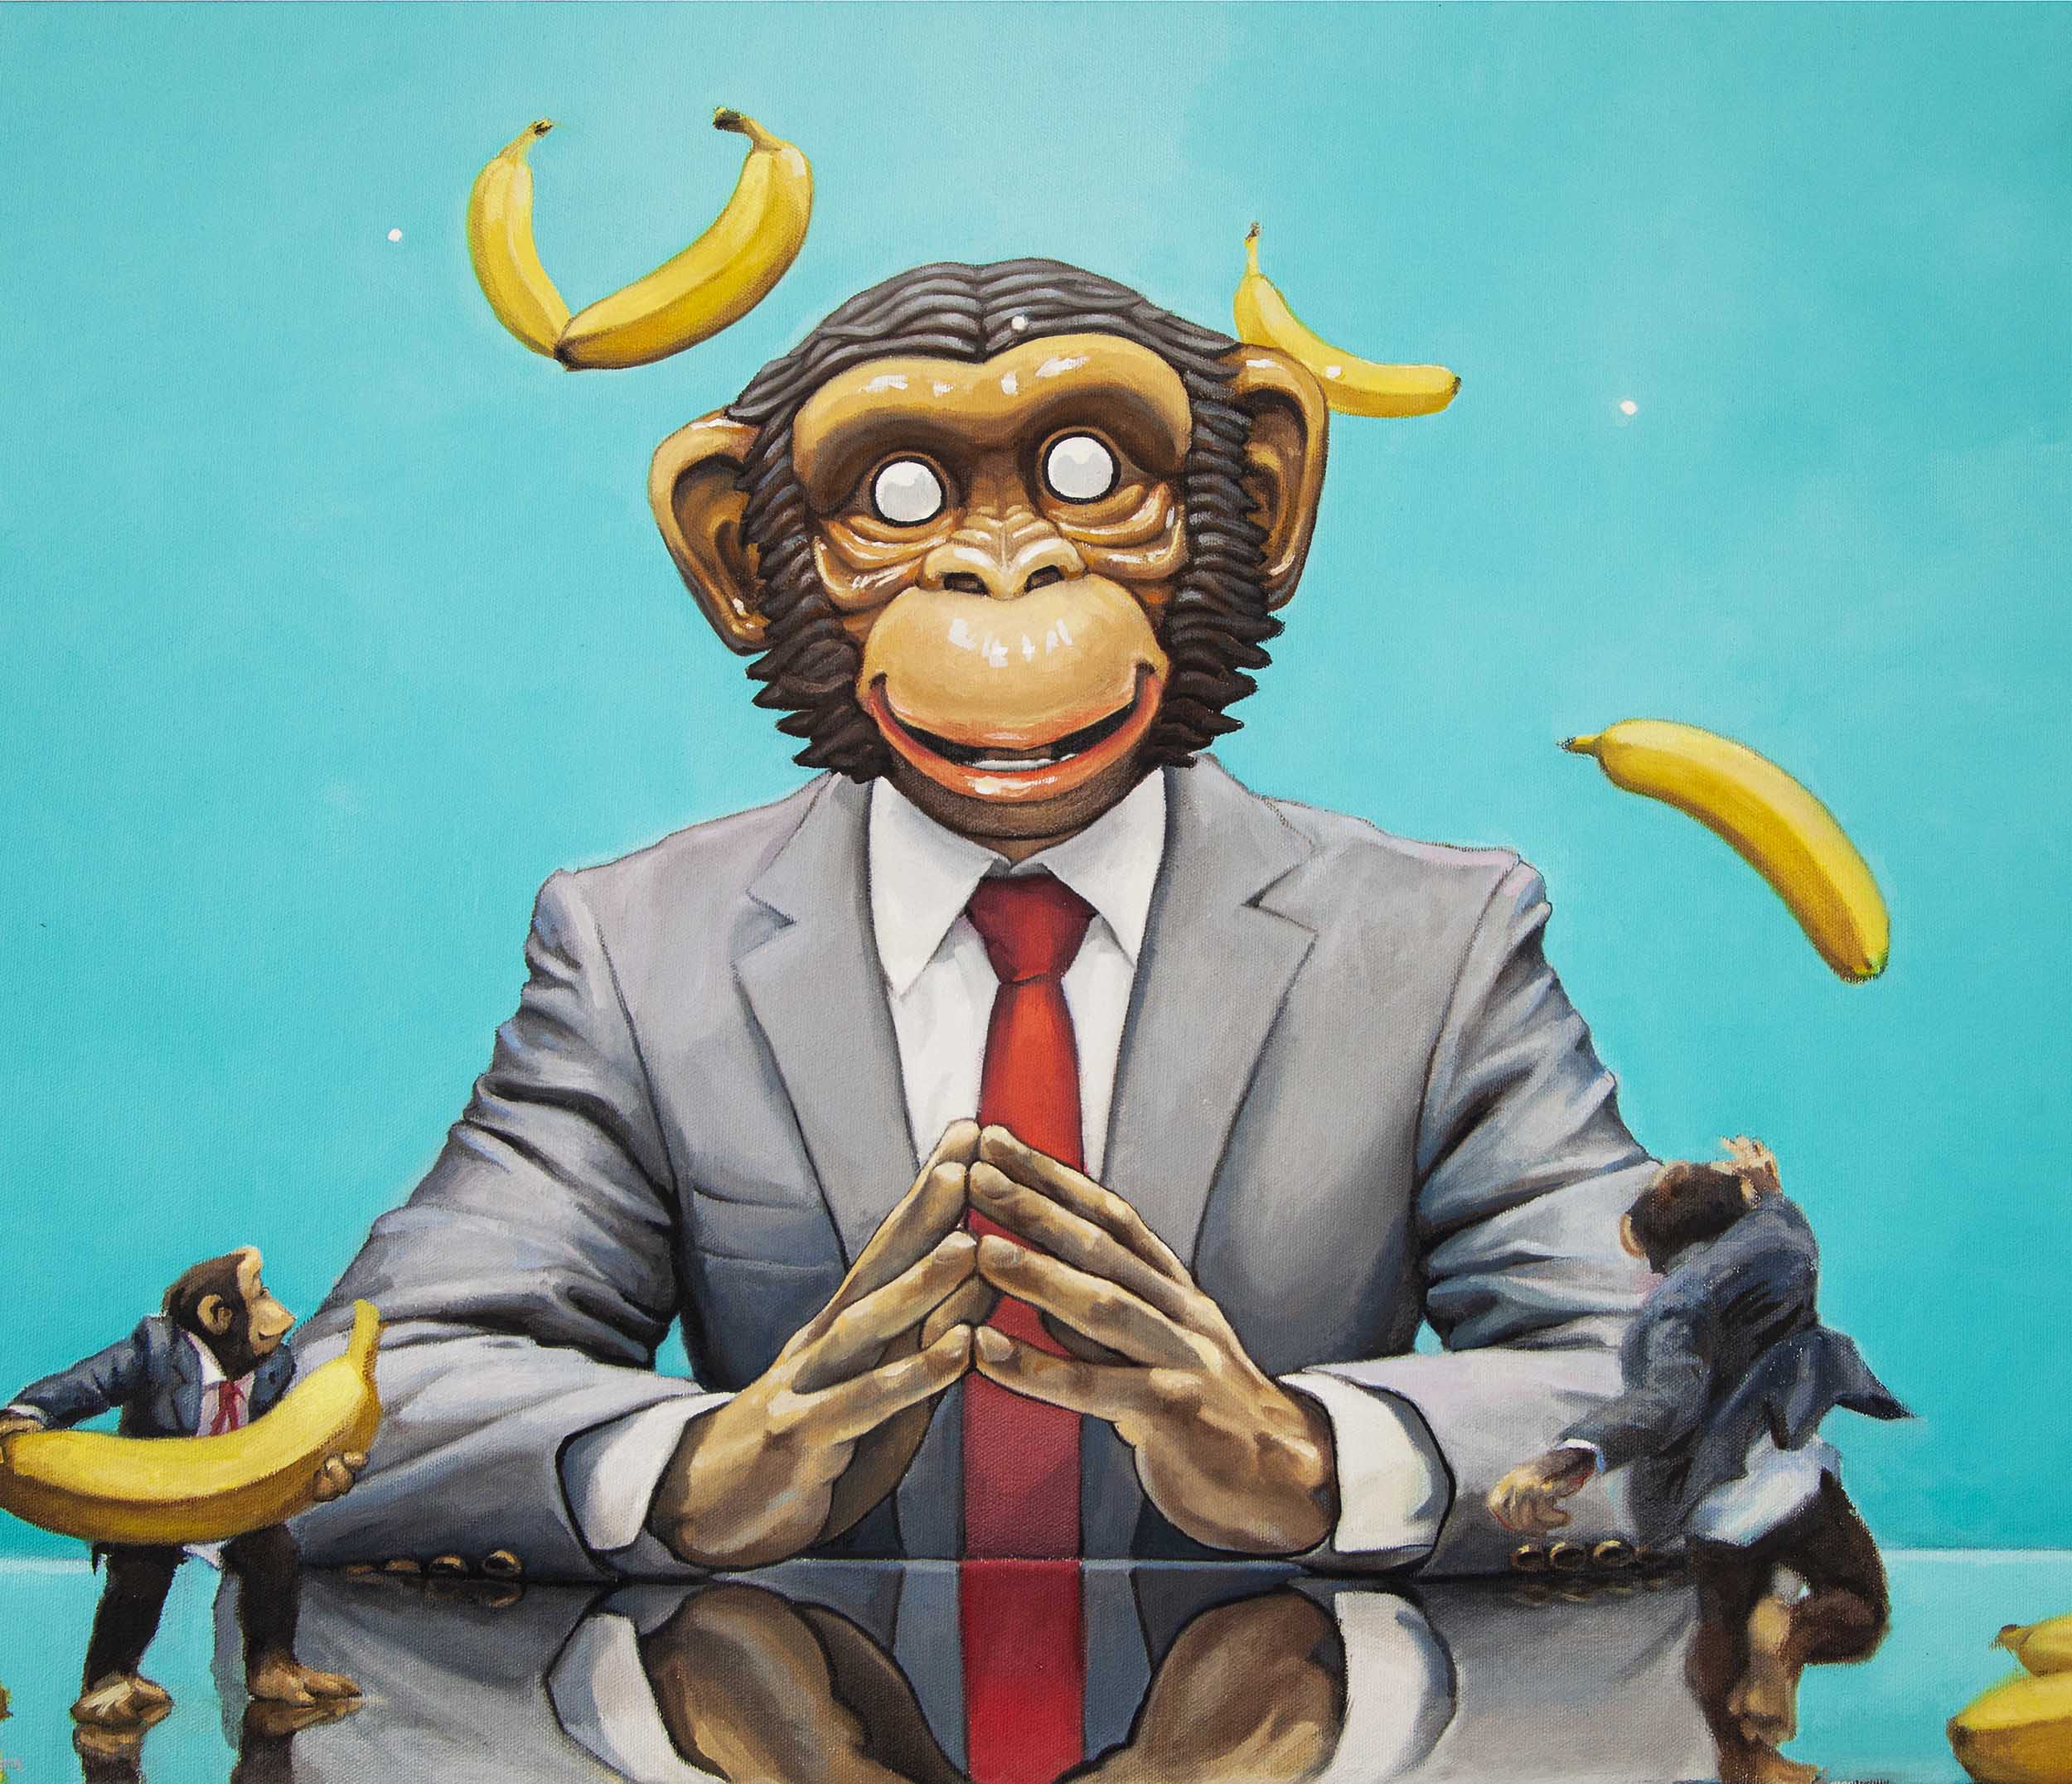 Monkey in a business suit with two smaller monkeys throwing Bananas at him